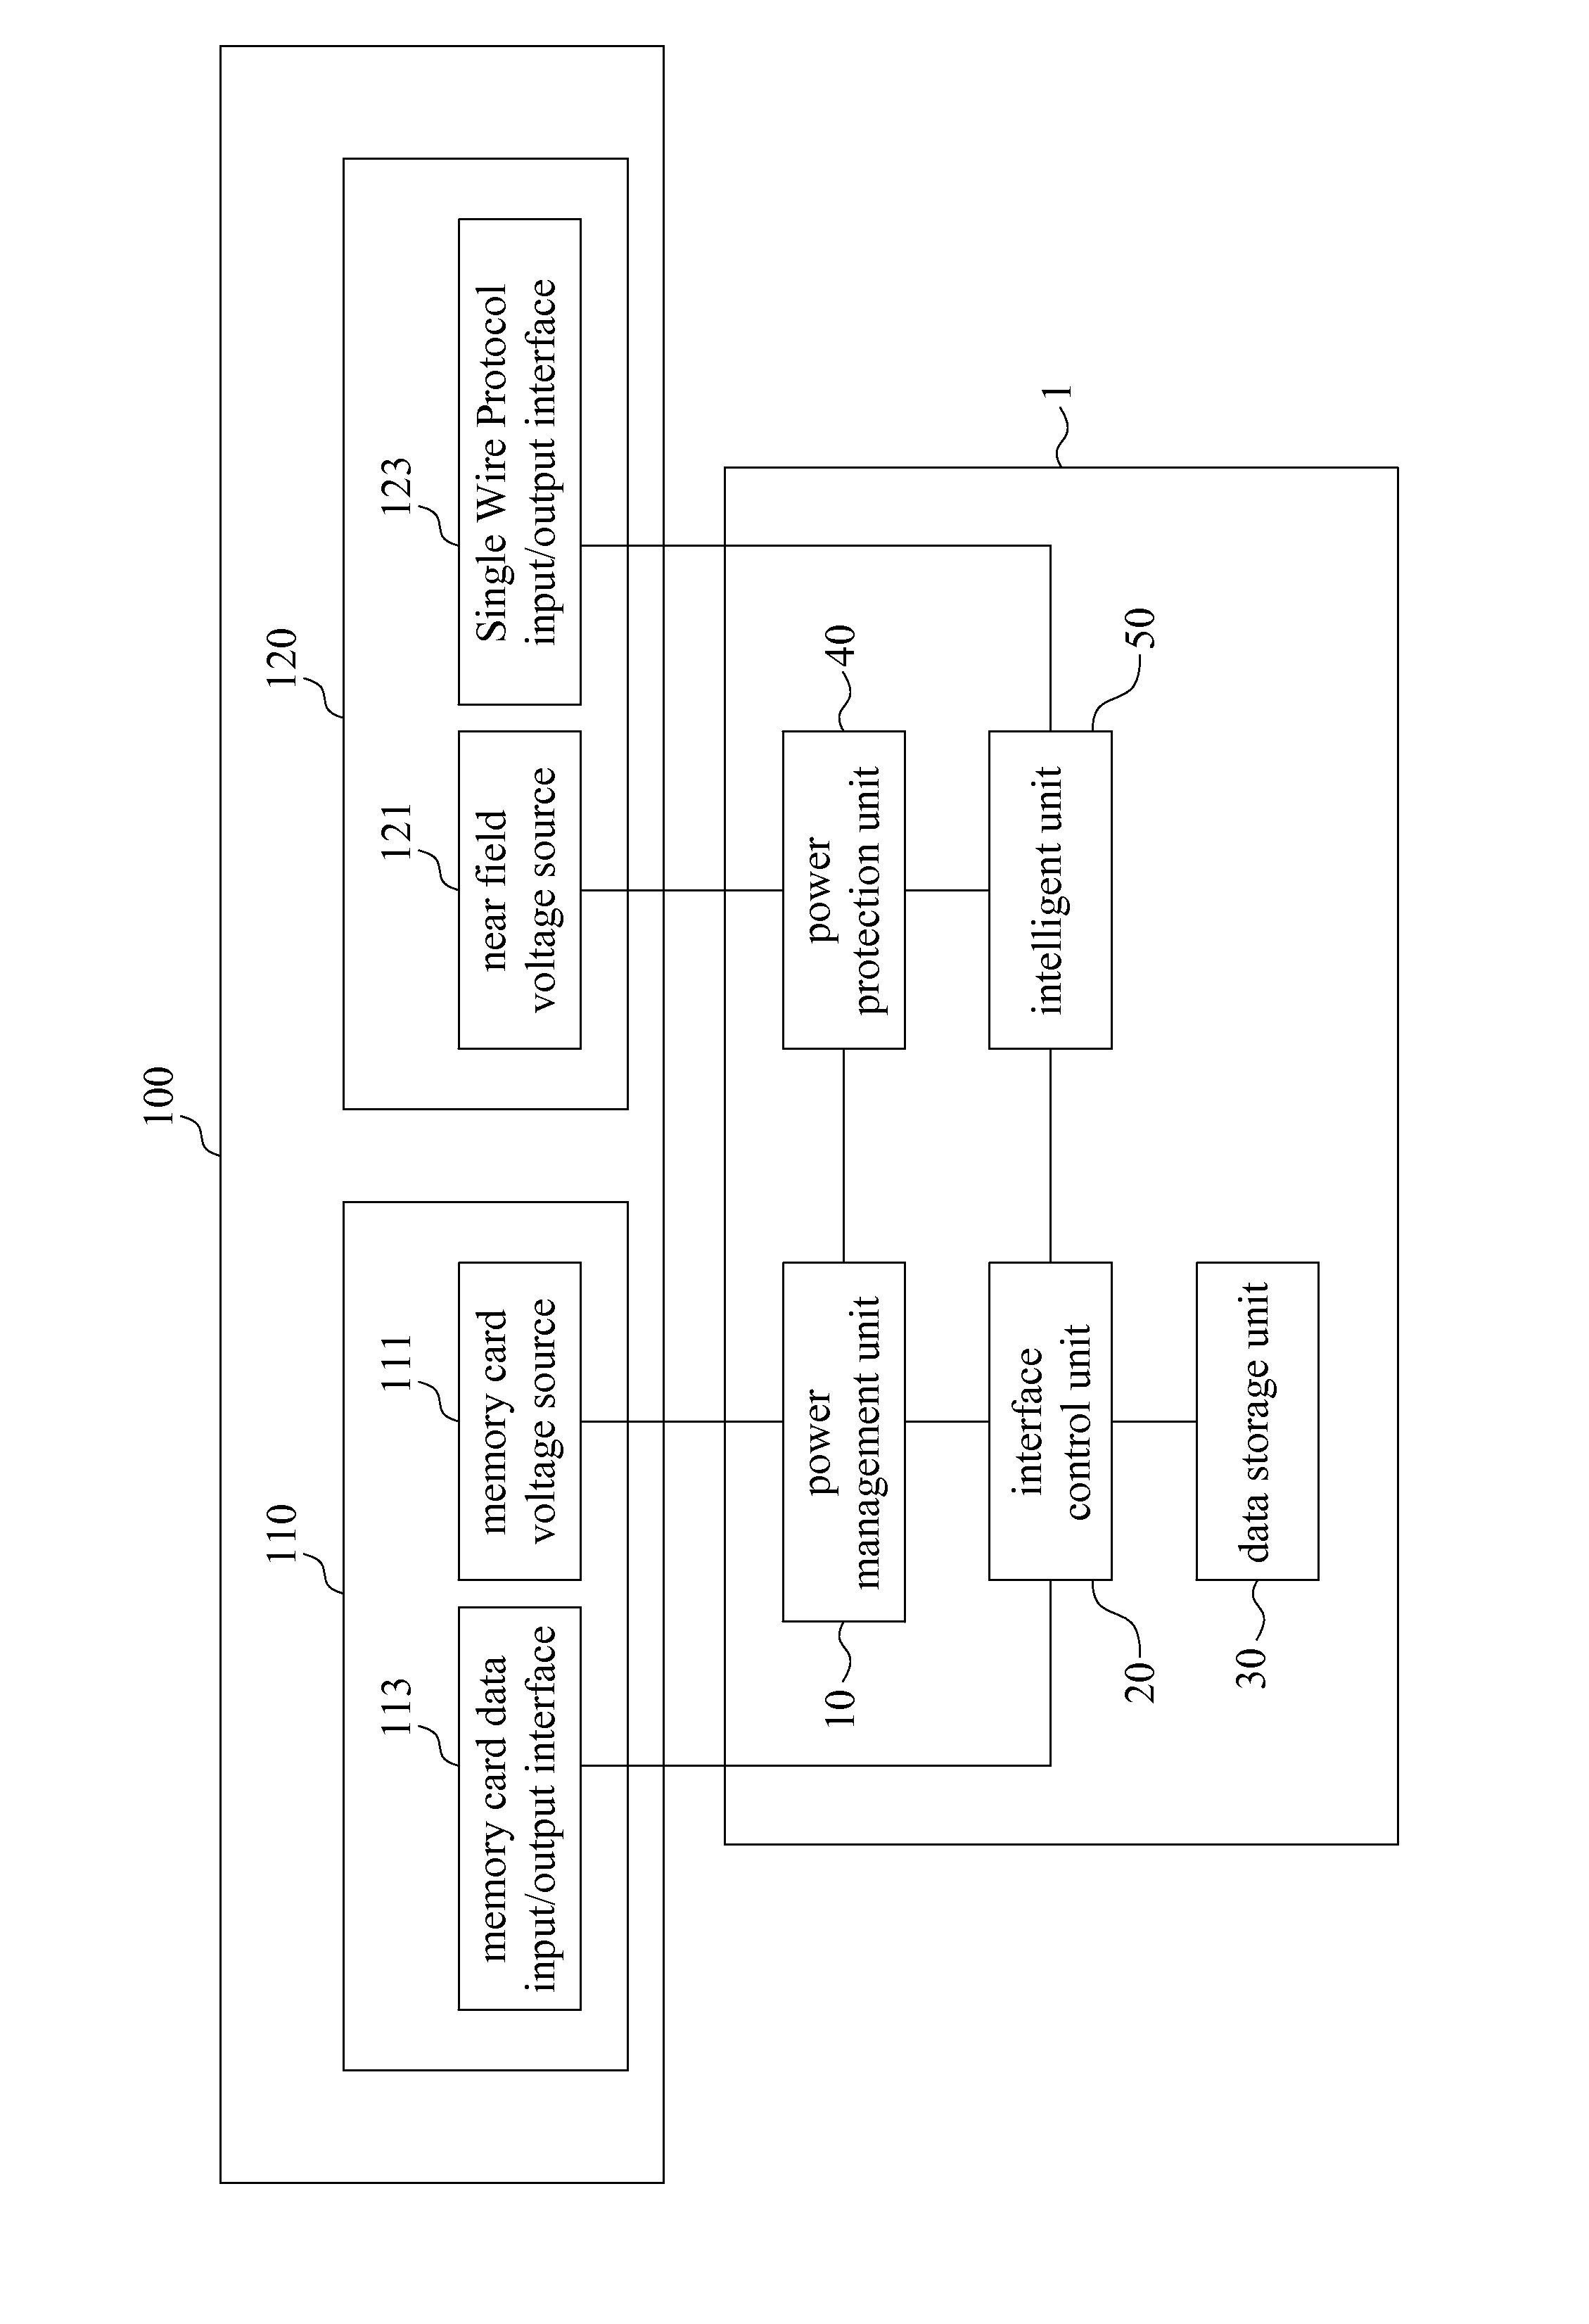 Memory card supporting near field communication through single wire protocol